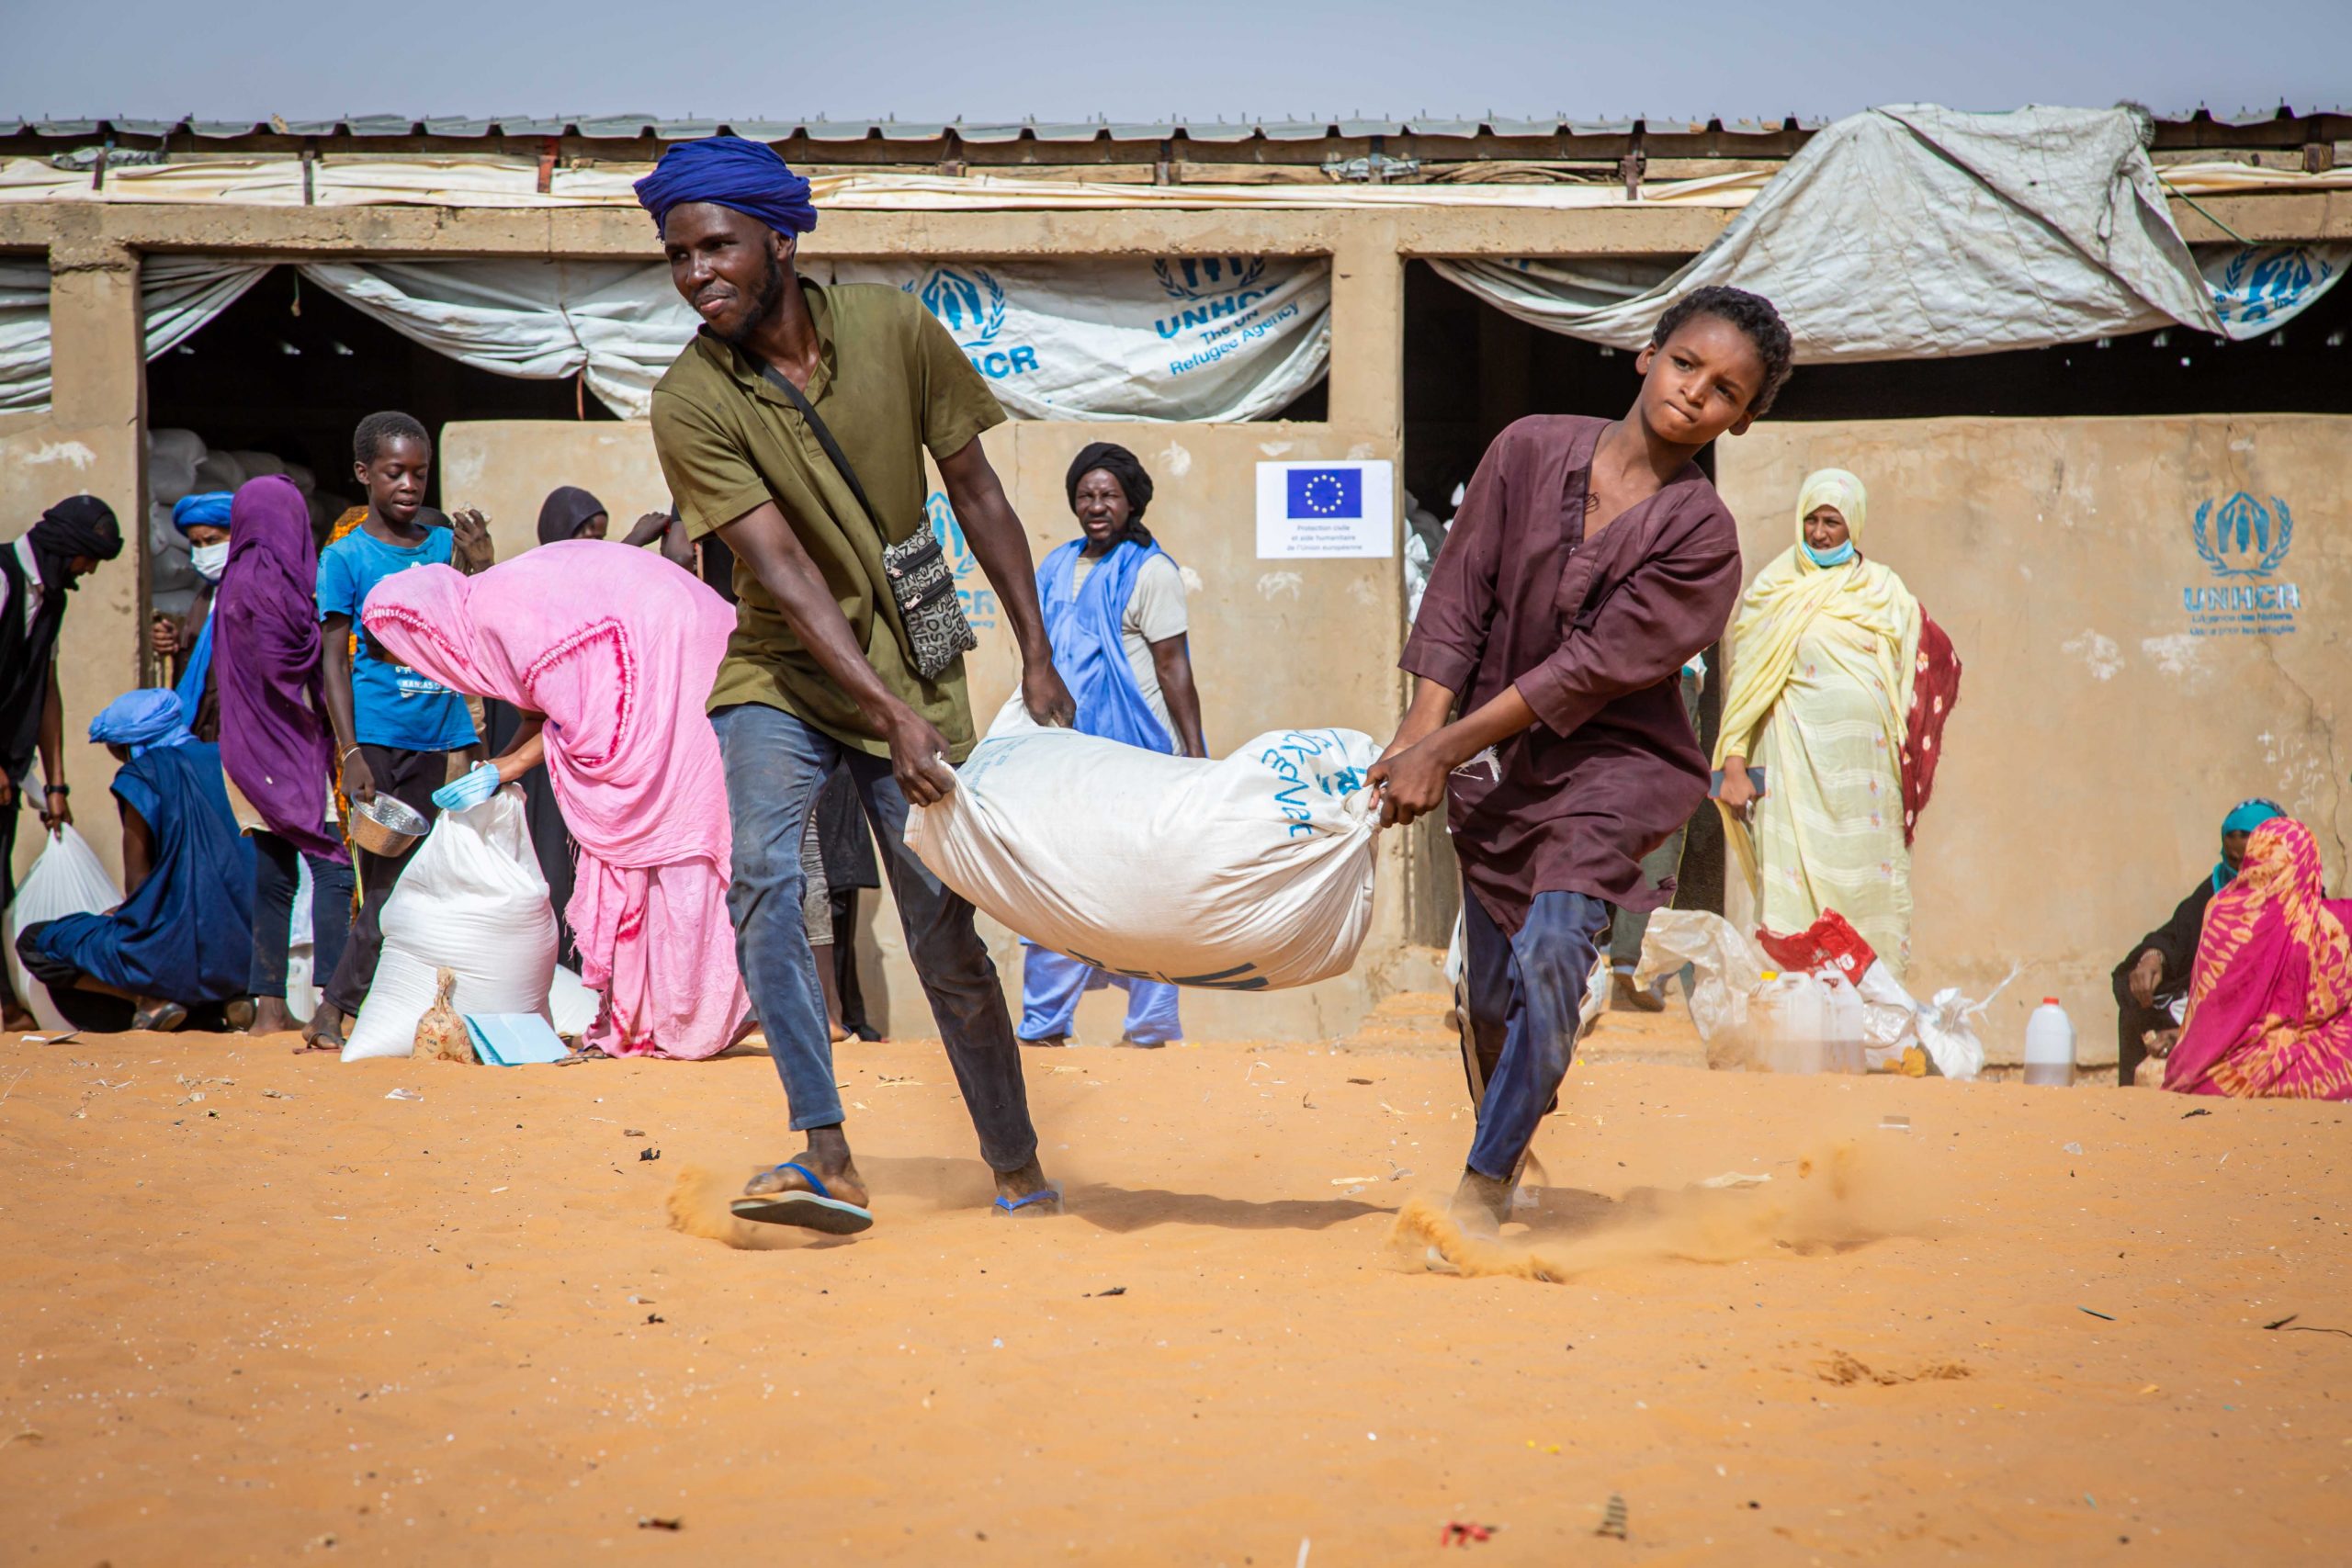 ©UNICEF, 2021, Source: EC - Audiovisual Service, Since the beginning of the covid-19 pandemic, the WFP has been organizing food (rice, oil, salt, sugar) and cash distributions every two months to help some 63,000 Malian refugees in the Mbera camp located on the border with Mali. This distribution is co-organized with the UNHCR, which also distributes soap to improve hygiene in households.